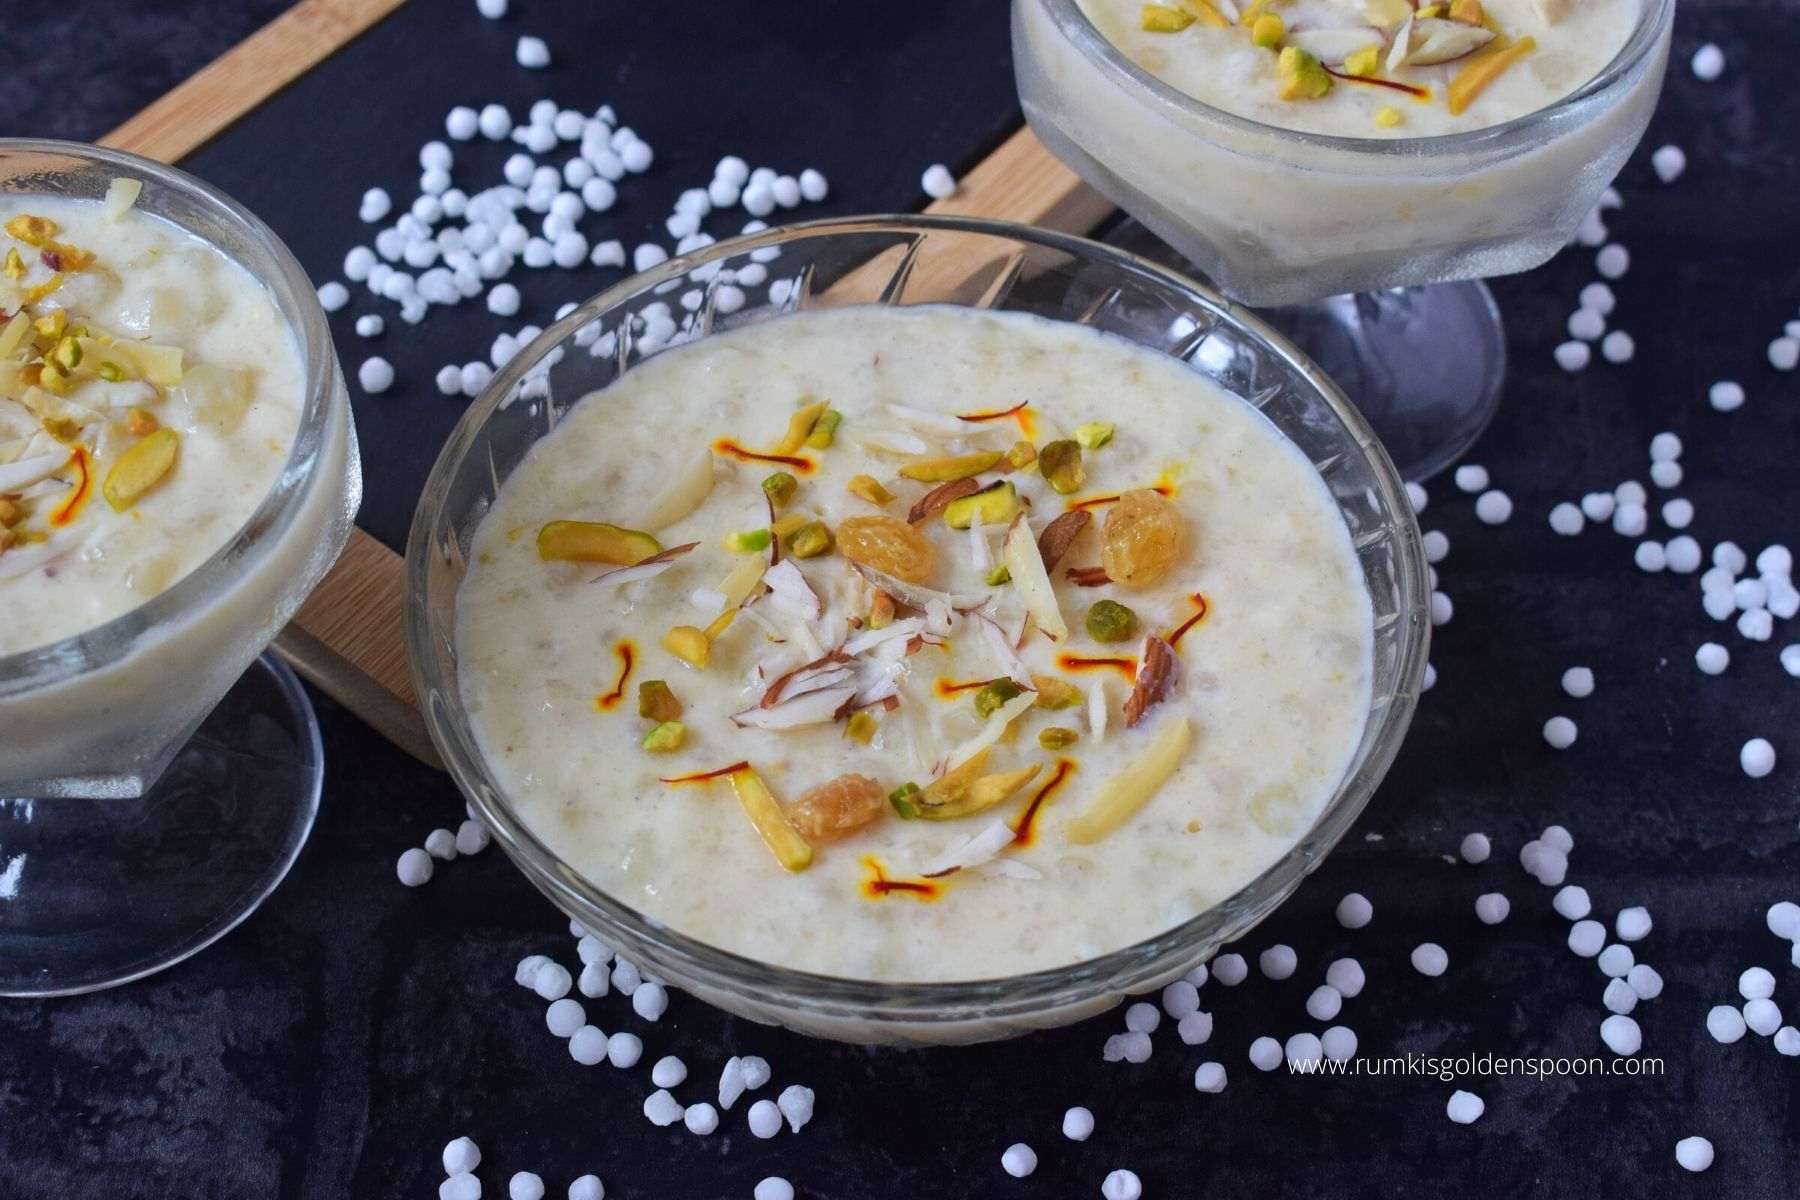 sabudana kheer, sabudane ki kheer, sabudana ki kheer, sabudana kheer recipe, how to make sabudana kheer, sabudane ki kheer kaise banti hai, sabudana kheer recipe in hindi, sago payasam, sabudana kheer benefits, sabudana ki kheer banane ki vidhi, sabudana kheer with jaggery, sabudana ki kheer kaise banta hai, sabudane ki kheer ke fayde, is sabudana healthy for weight loss, sabudana kheer for babies, sabudana kheer in hindi, sabudane ki kheer kaise banai jati hai, sabudana ki kheer ki recipe, sabudane ki kheer banane ki recipe, sago payasam recipe, can we eat sabudana in fast, sabudana kheer recipe in marathi, sabudane ki kheer recipe, sabudana kheer without milk, how to prepare sabudana kheer, sabudana kheer recipe for babies, sabudana kheer ke fayde, sabudana kheer banane ki vidhi, is sabudana is good for weight loss, sabudana kheer for weight gain, sabudana ki kheer recipe, sabudana kheer kaise banta hai, how to make sago payasam, sago payasam with jaggery, how to make payasam with sago, sabudana recipe for breakfast, vrat ka khana, navratri recipes, recipes of navratri food, navratri vrat recipes, navratri special recipes, Rumki's Golden Spoon